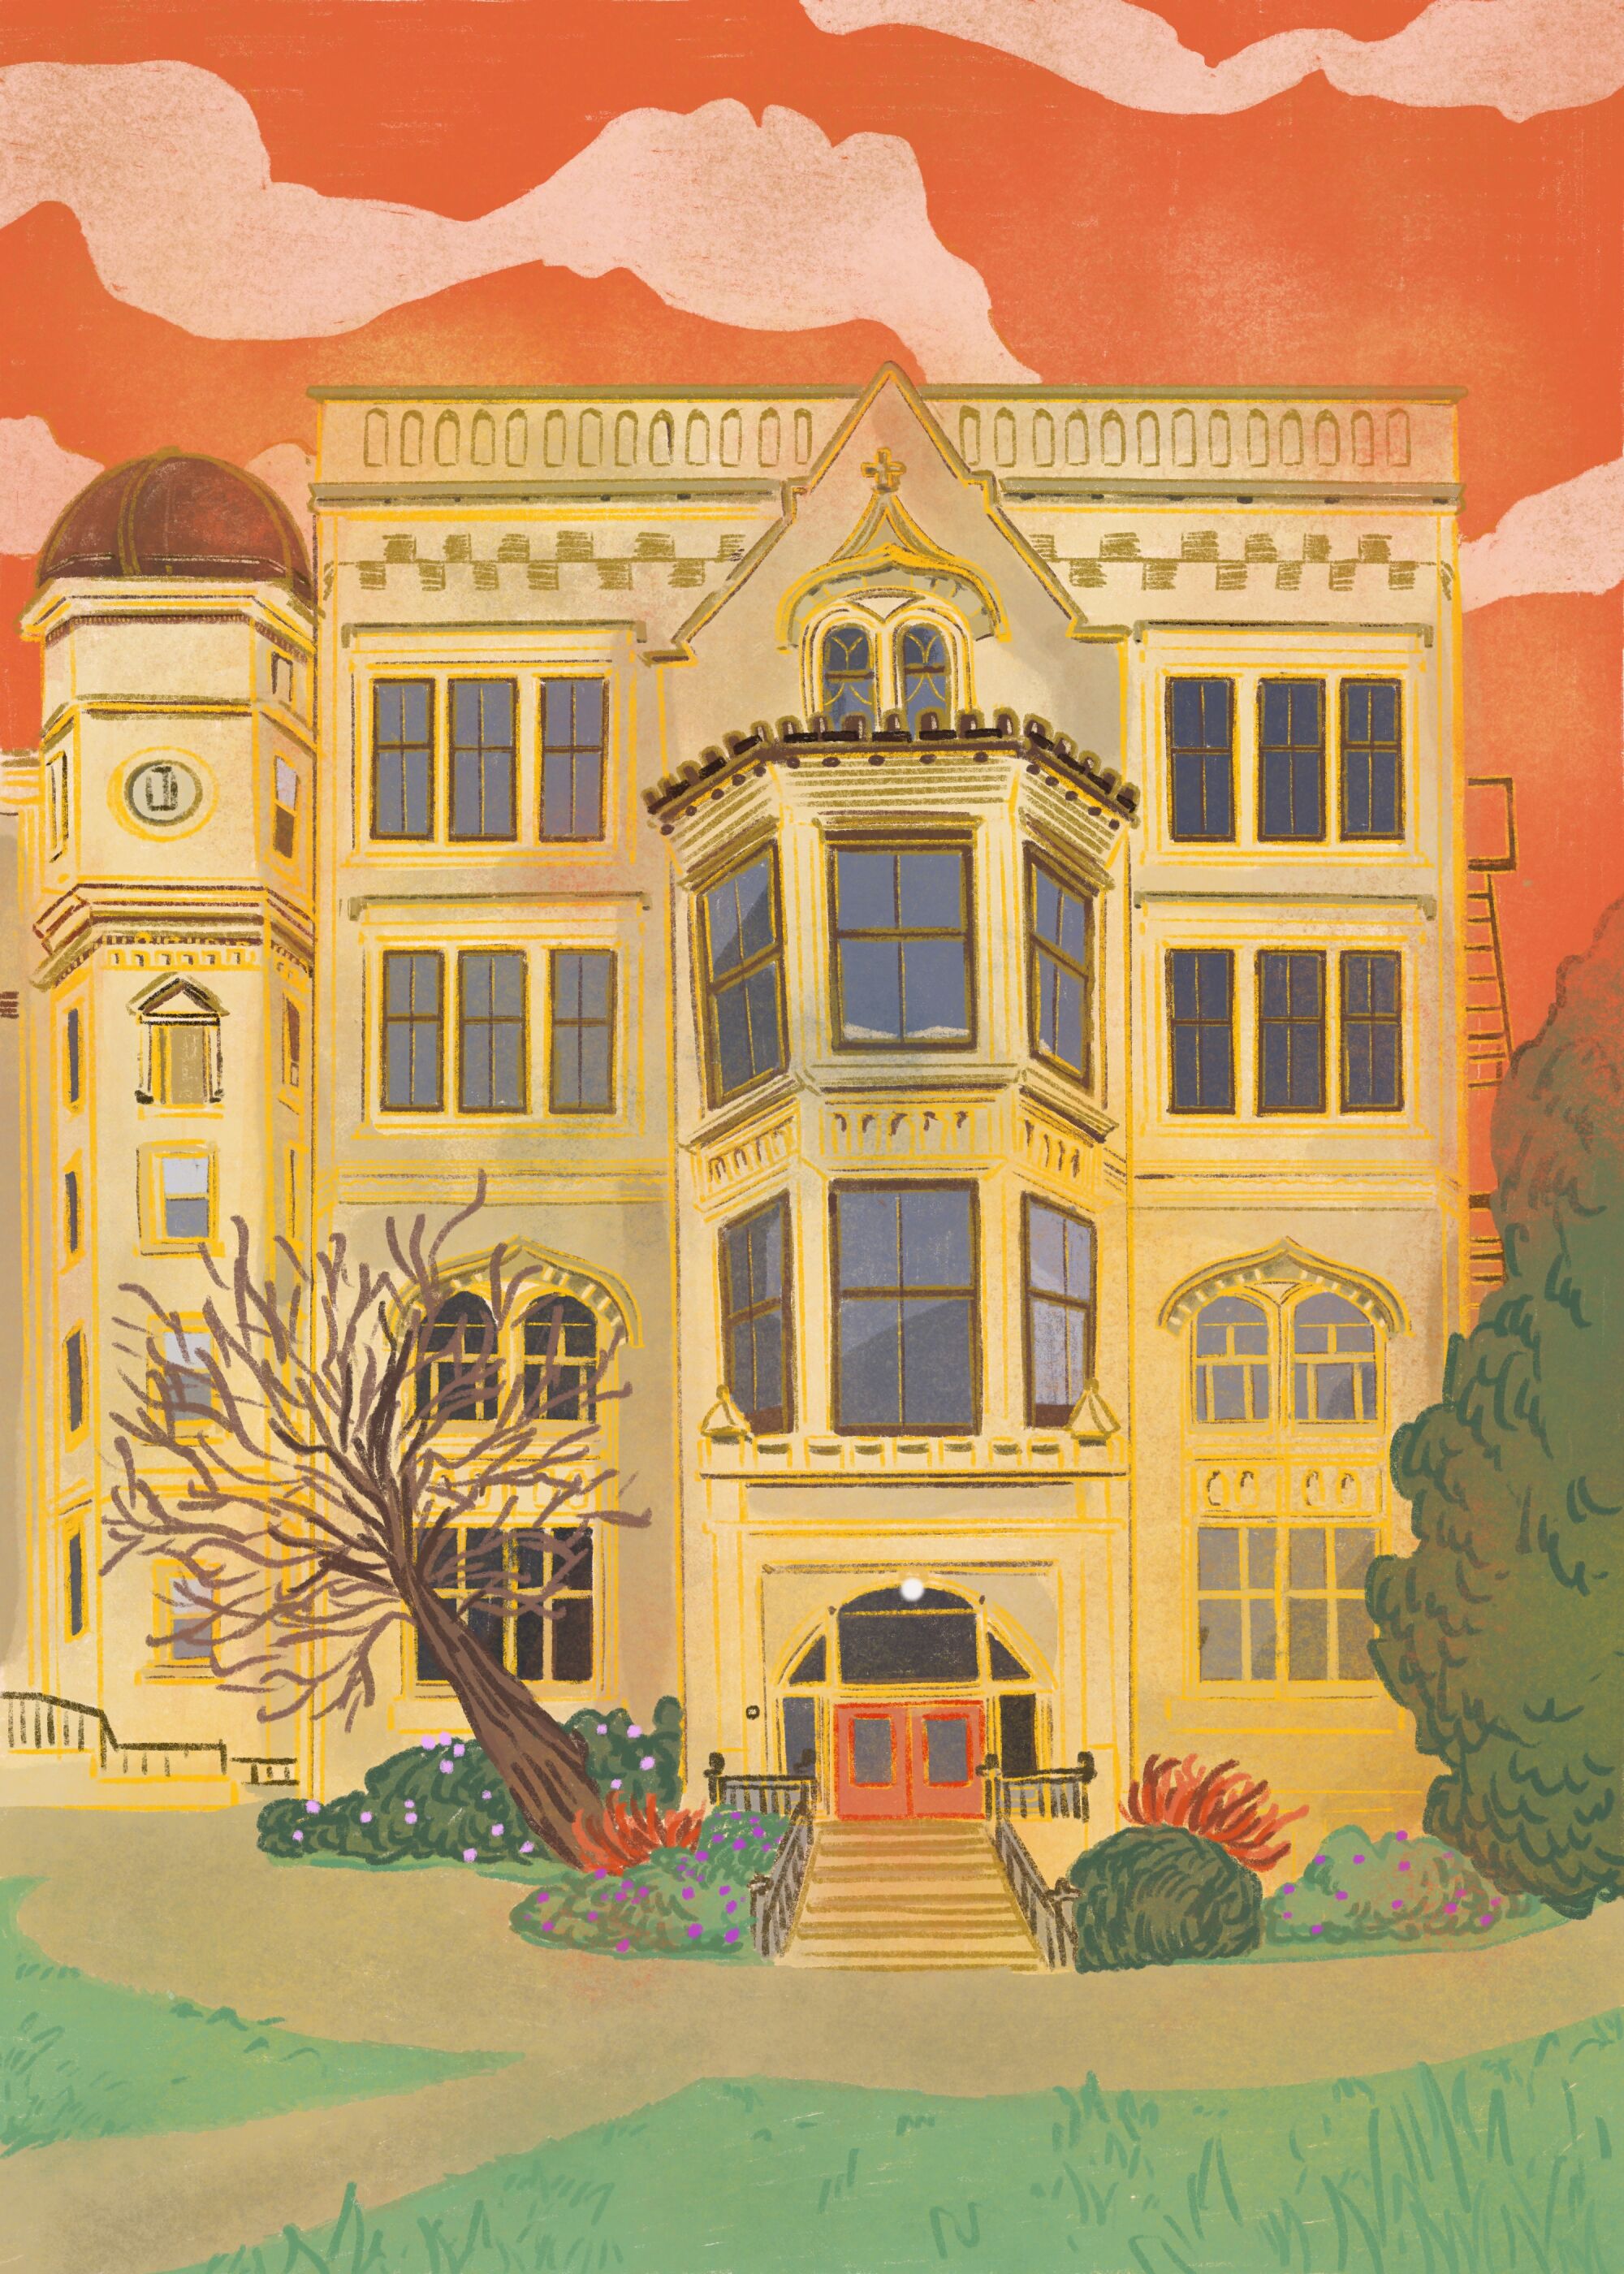 A drawing of an ornate four-story building with a reddish sky above.